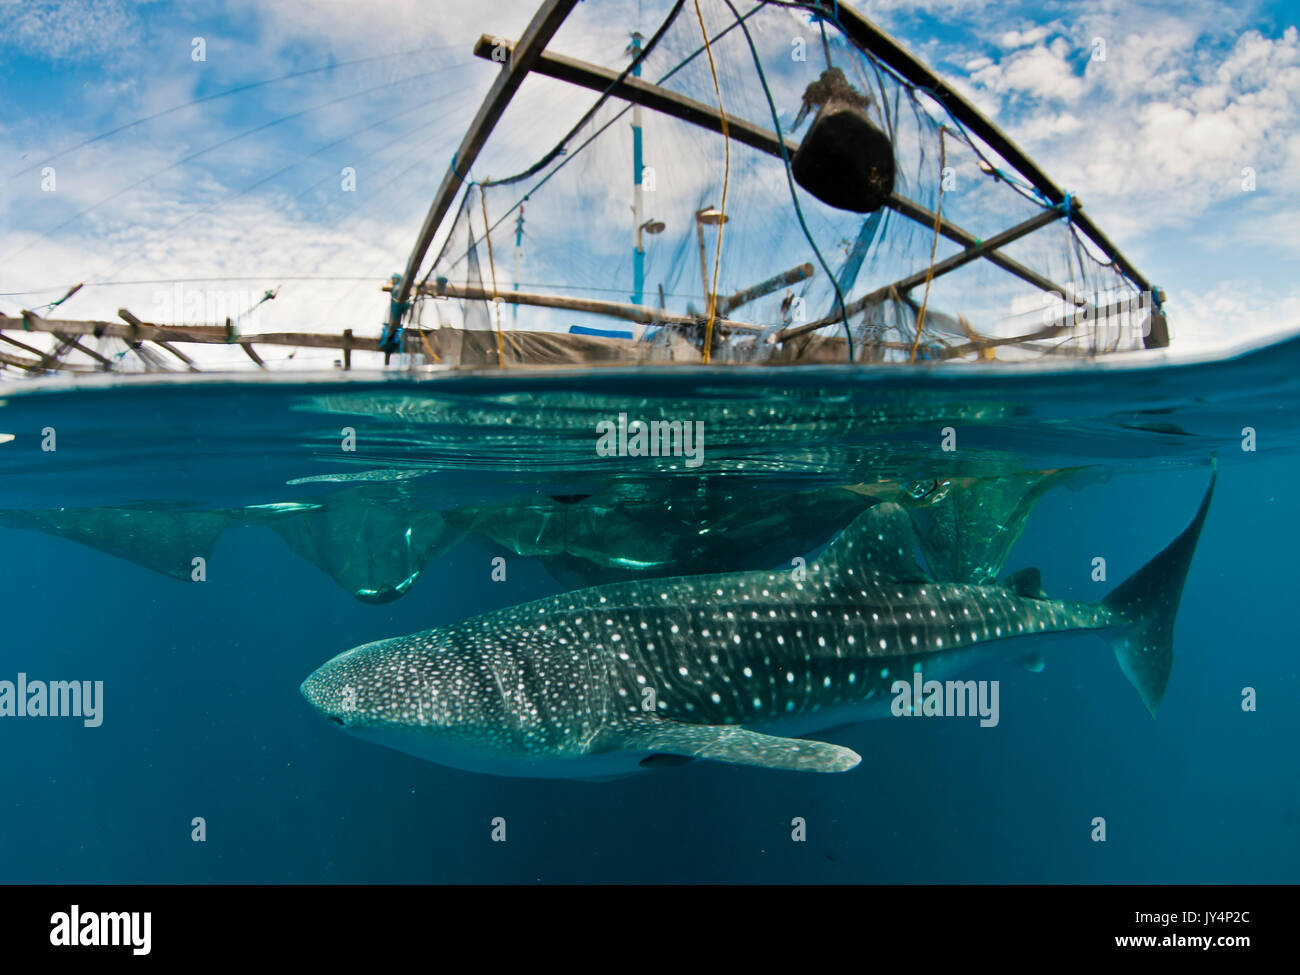 Split view showing above and below the waterline of a whale shark under a floating fishing platform, Cenderawasih Bay, Indonesia. Stock Photo